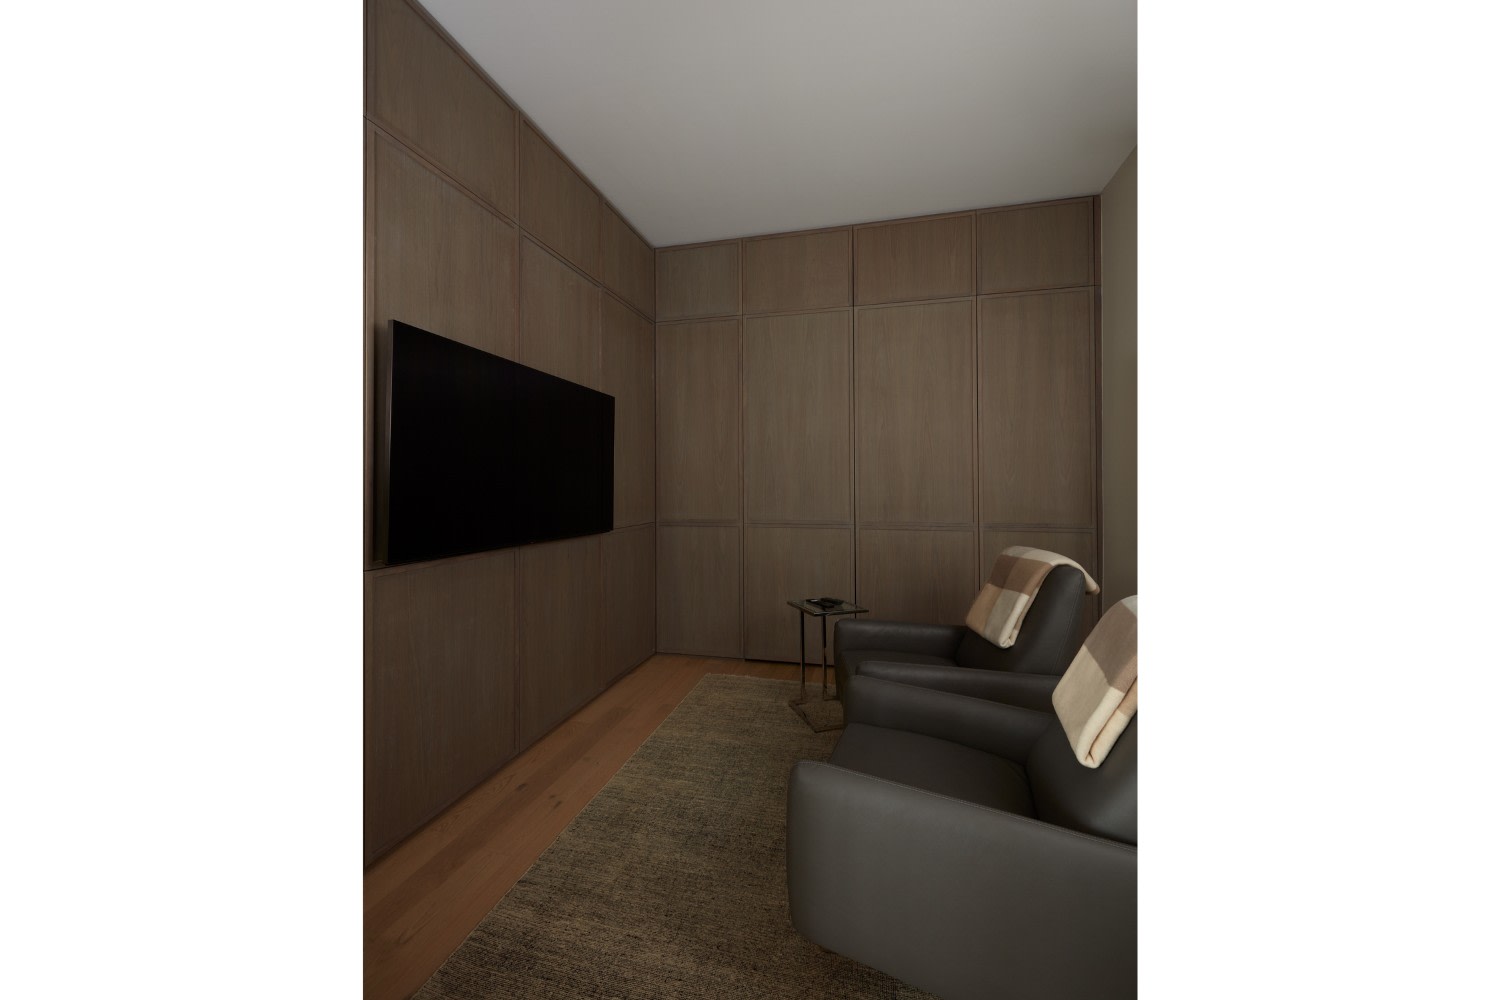 Project Park: Charcoal Grey Panel Walls in Den